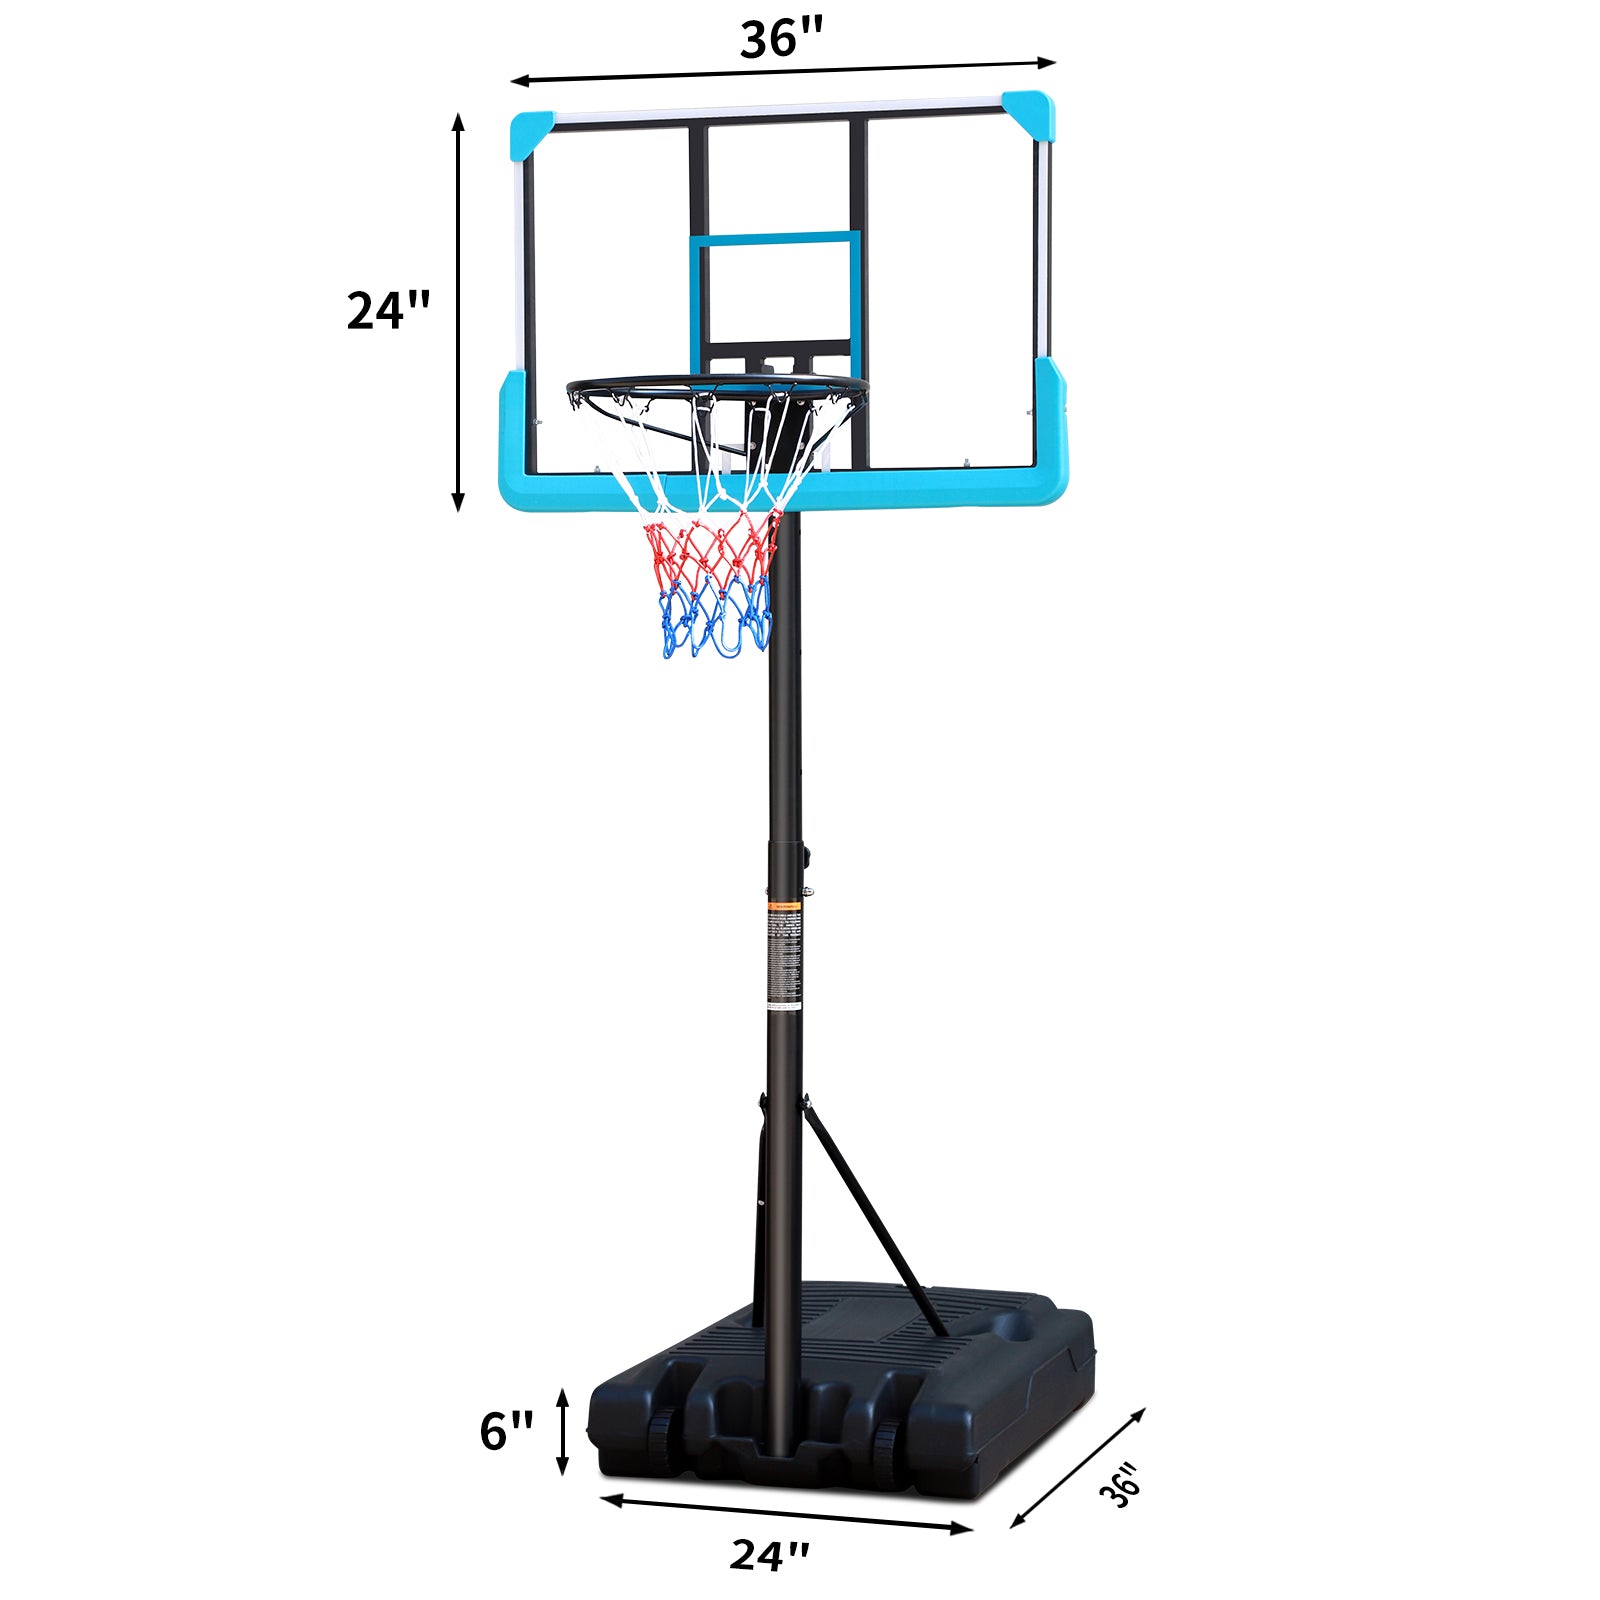 Portable Poolside Black Basketball Hoop Swimming Pool 4ft to 6.5ft Height-Adjustable patio Basketball System Goal Stand for Kids